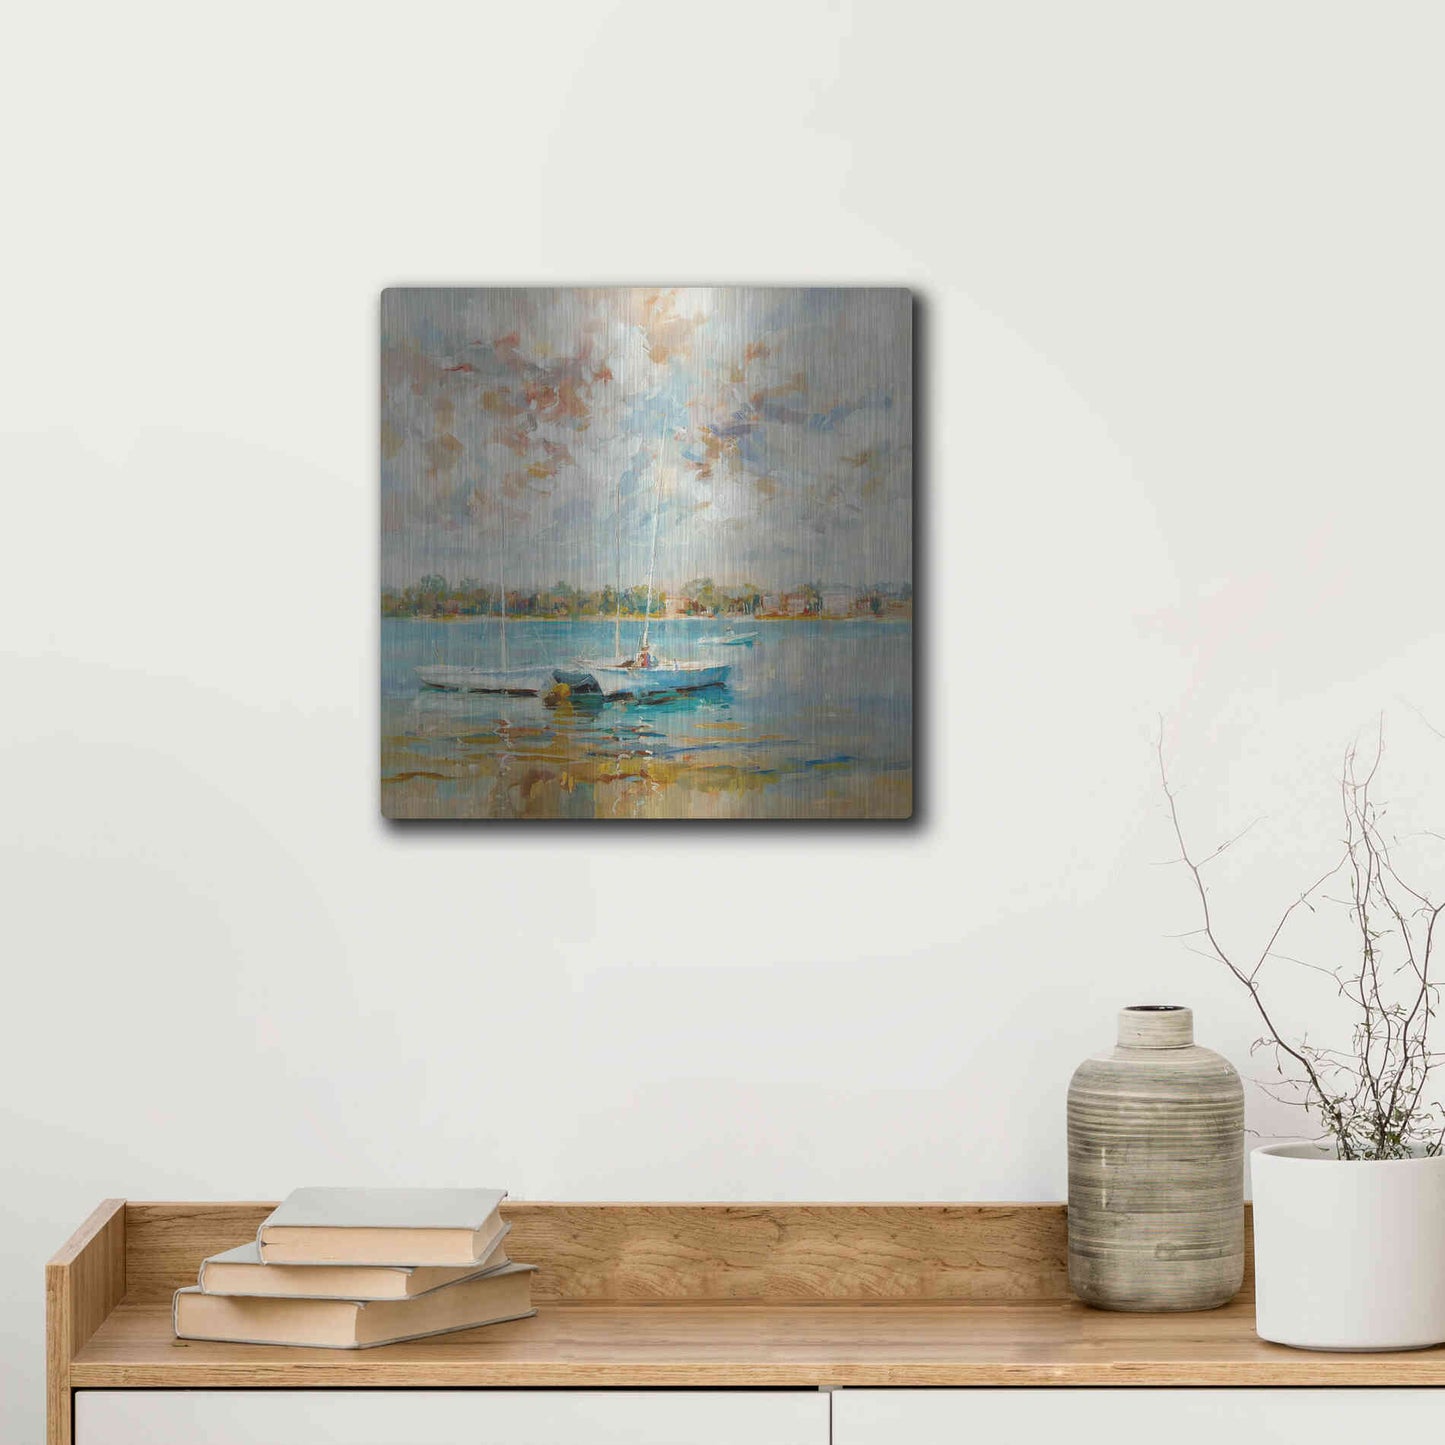 Luxe Metal Art 'At Water?s Edge' by Kasia Bruniany Metal Wall Art,12x12